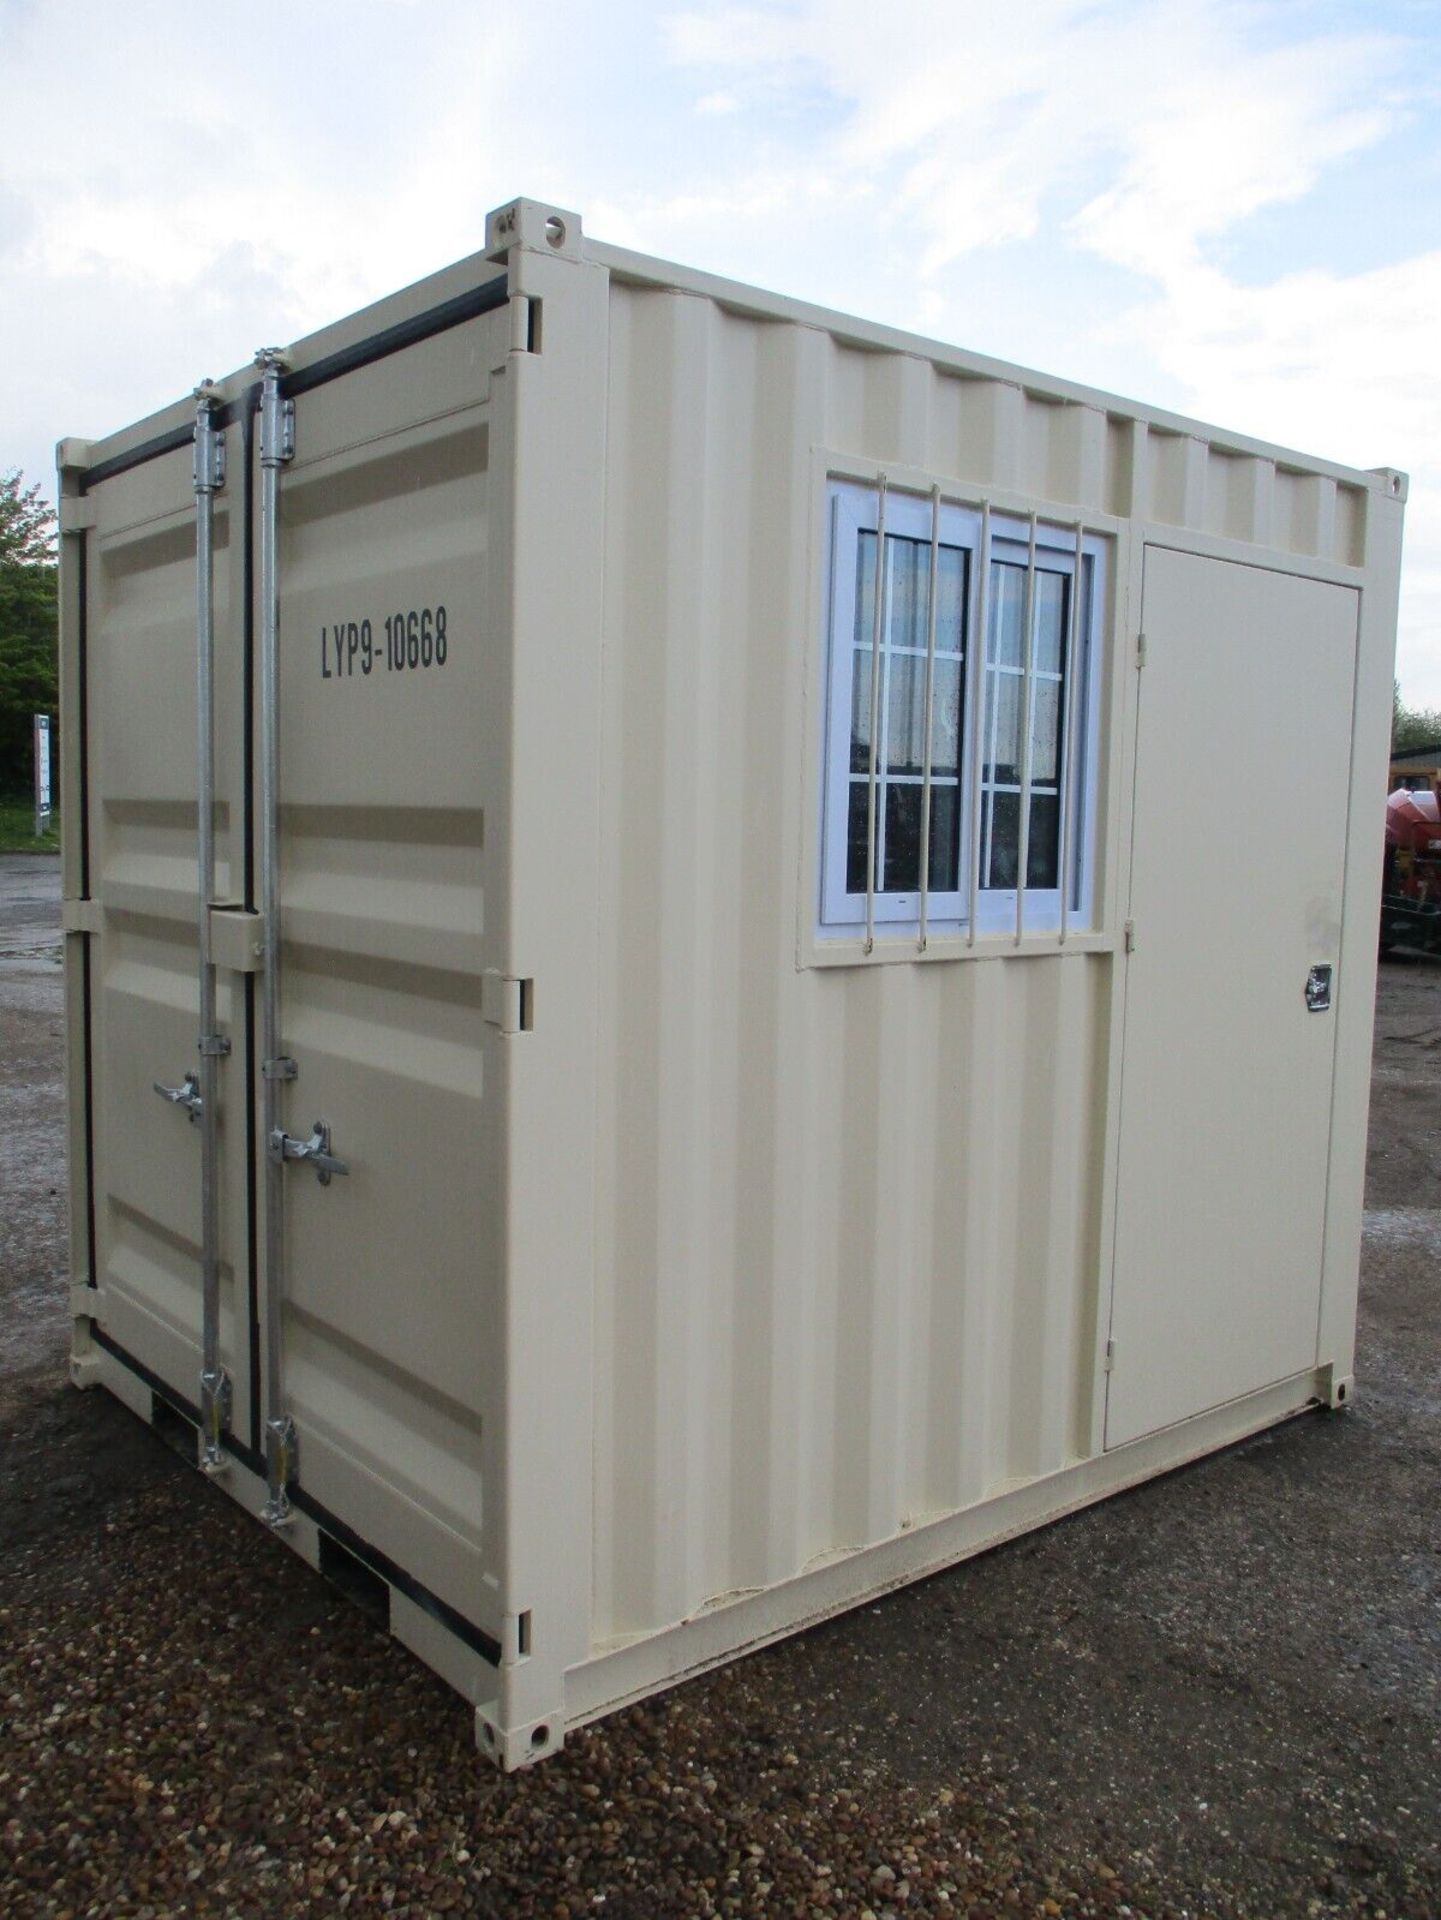 YOUR HOME OFFICE AWAITS: 9-FOOT CONTAINER WITH WINDOW - Image 2 of 7